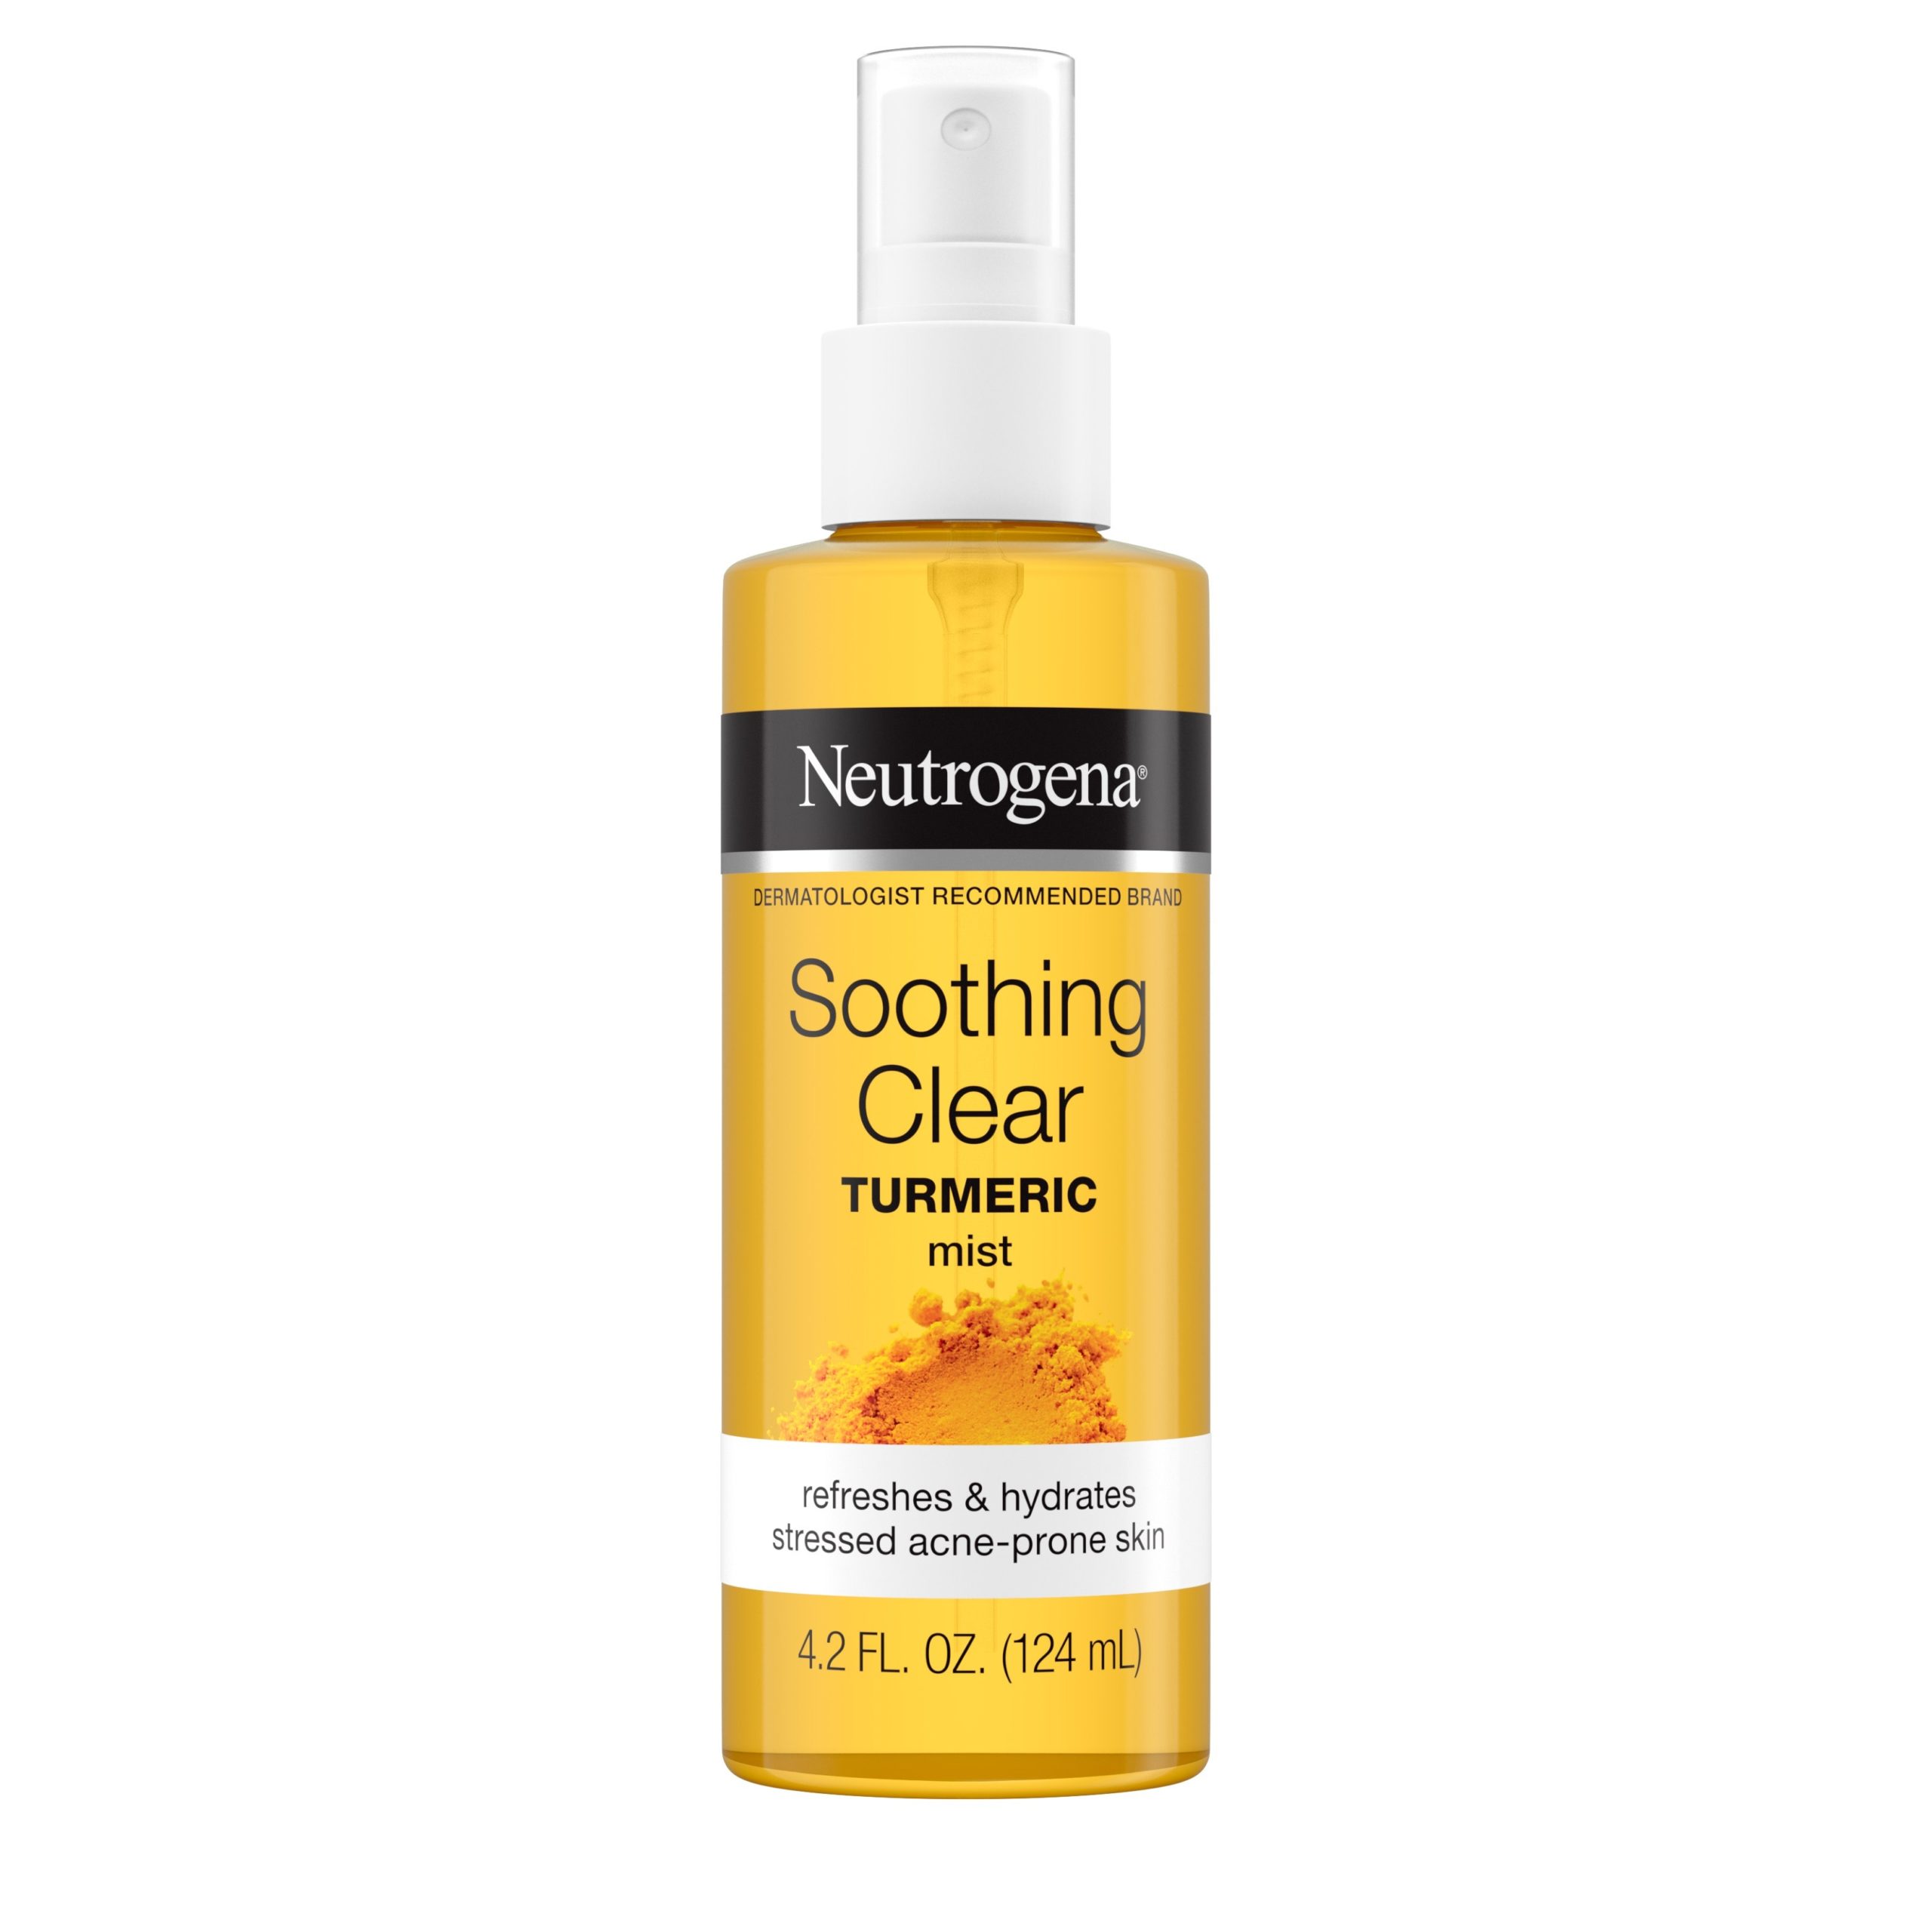 Neutrogena Soothing Clear Turmeric Mist Diminishes My Breakouts So Fast  — Review